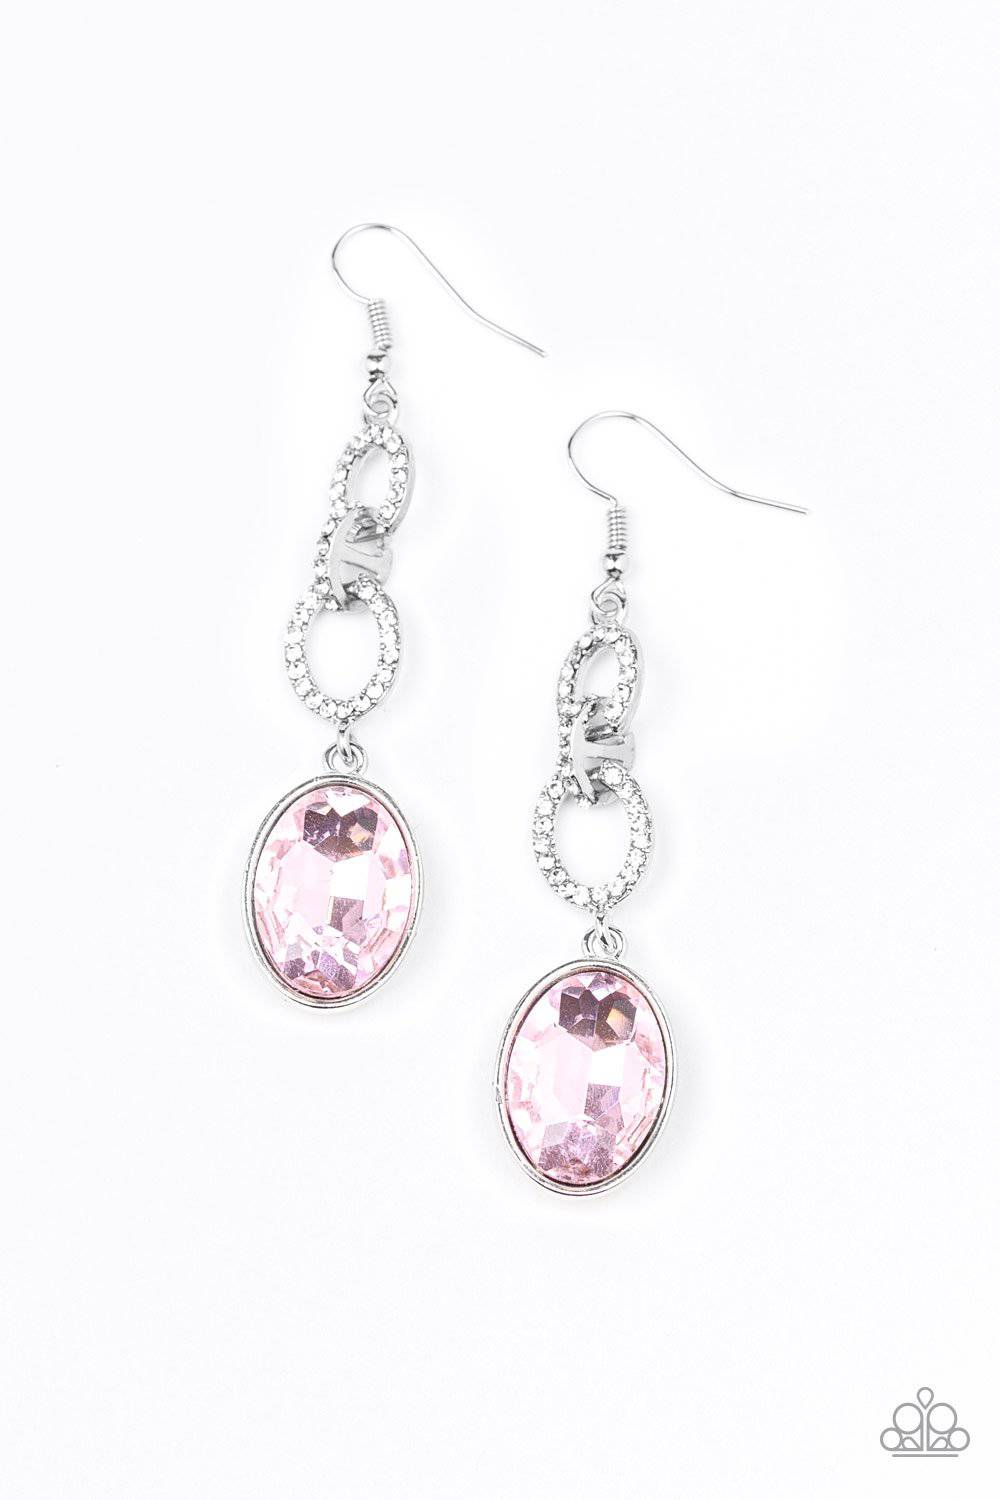 Extra Ice Queen - Pink & Rhinestone Earrings - Paparazzi Accessories - GlaMarous Titi Jewels